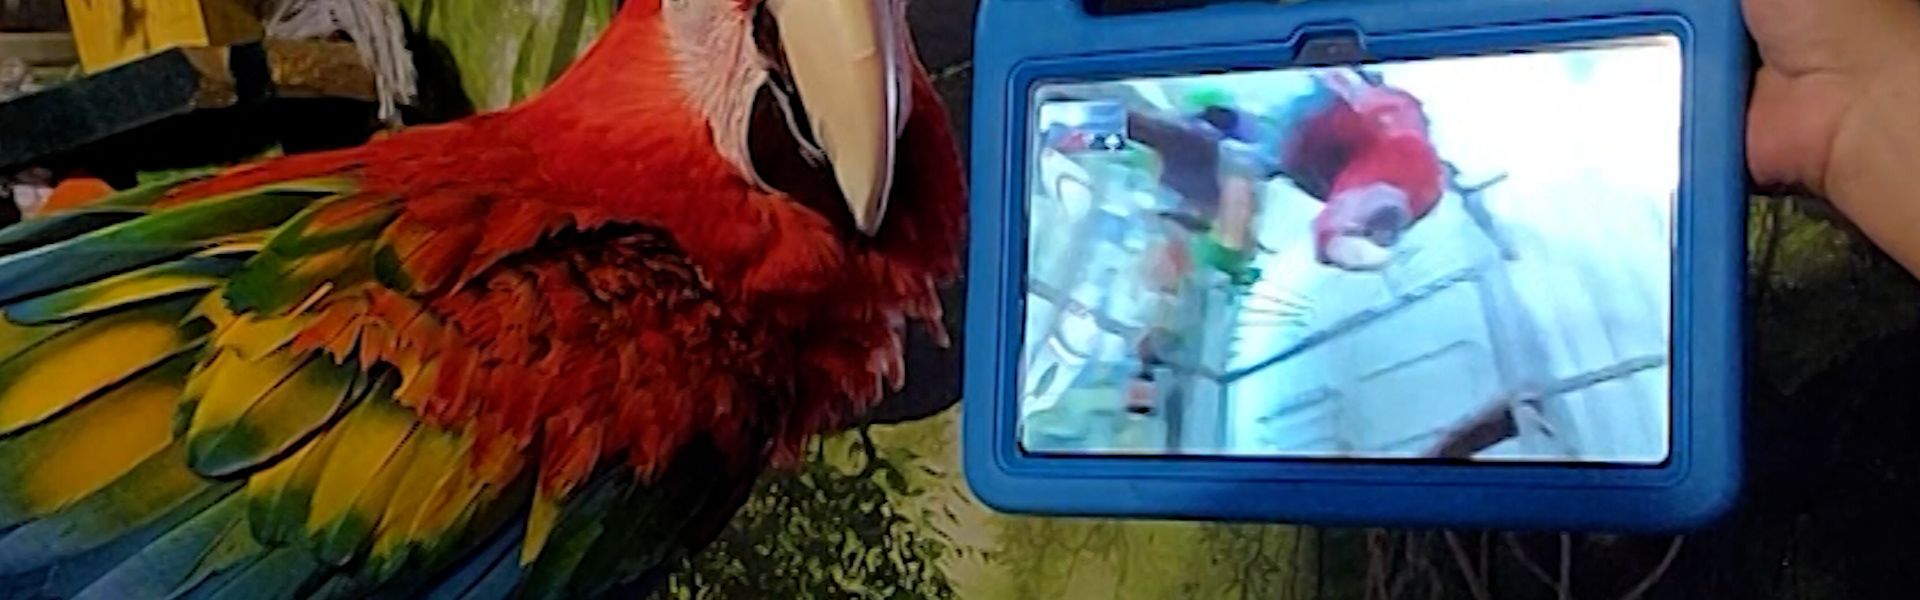 Kostuum Station strottenhoofd Parrots learn to call their feathered friends on video chat | CNN